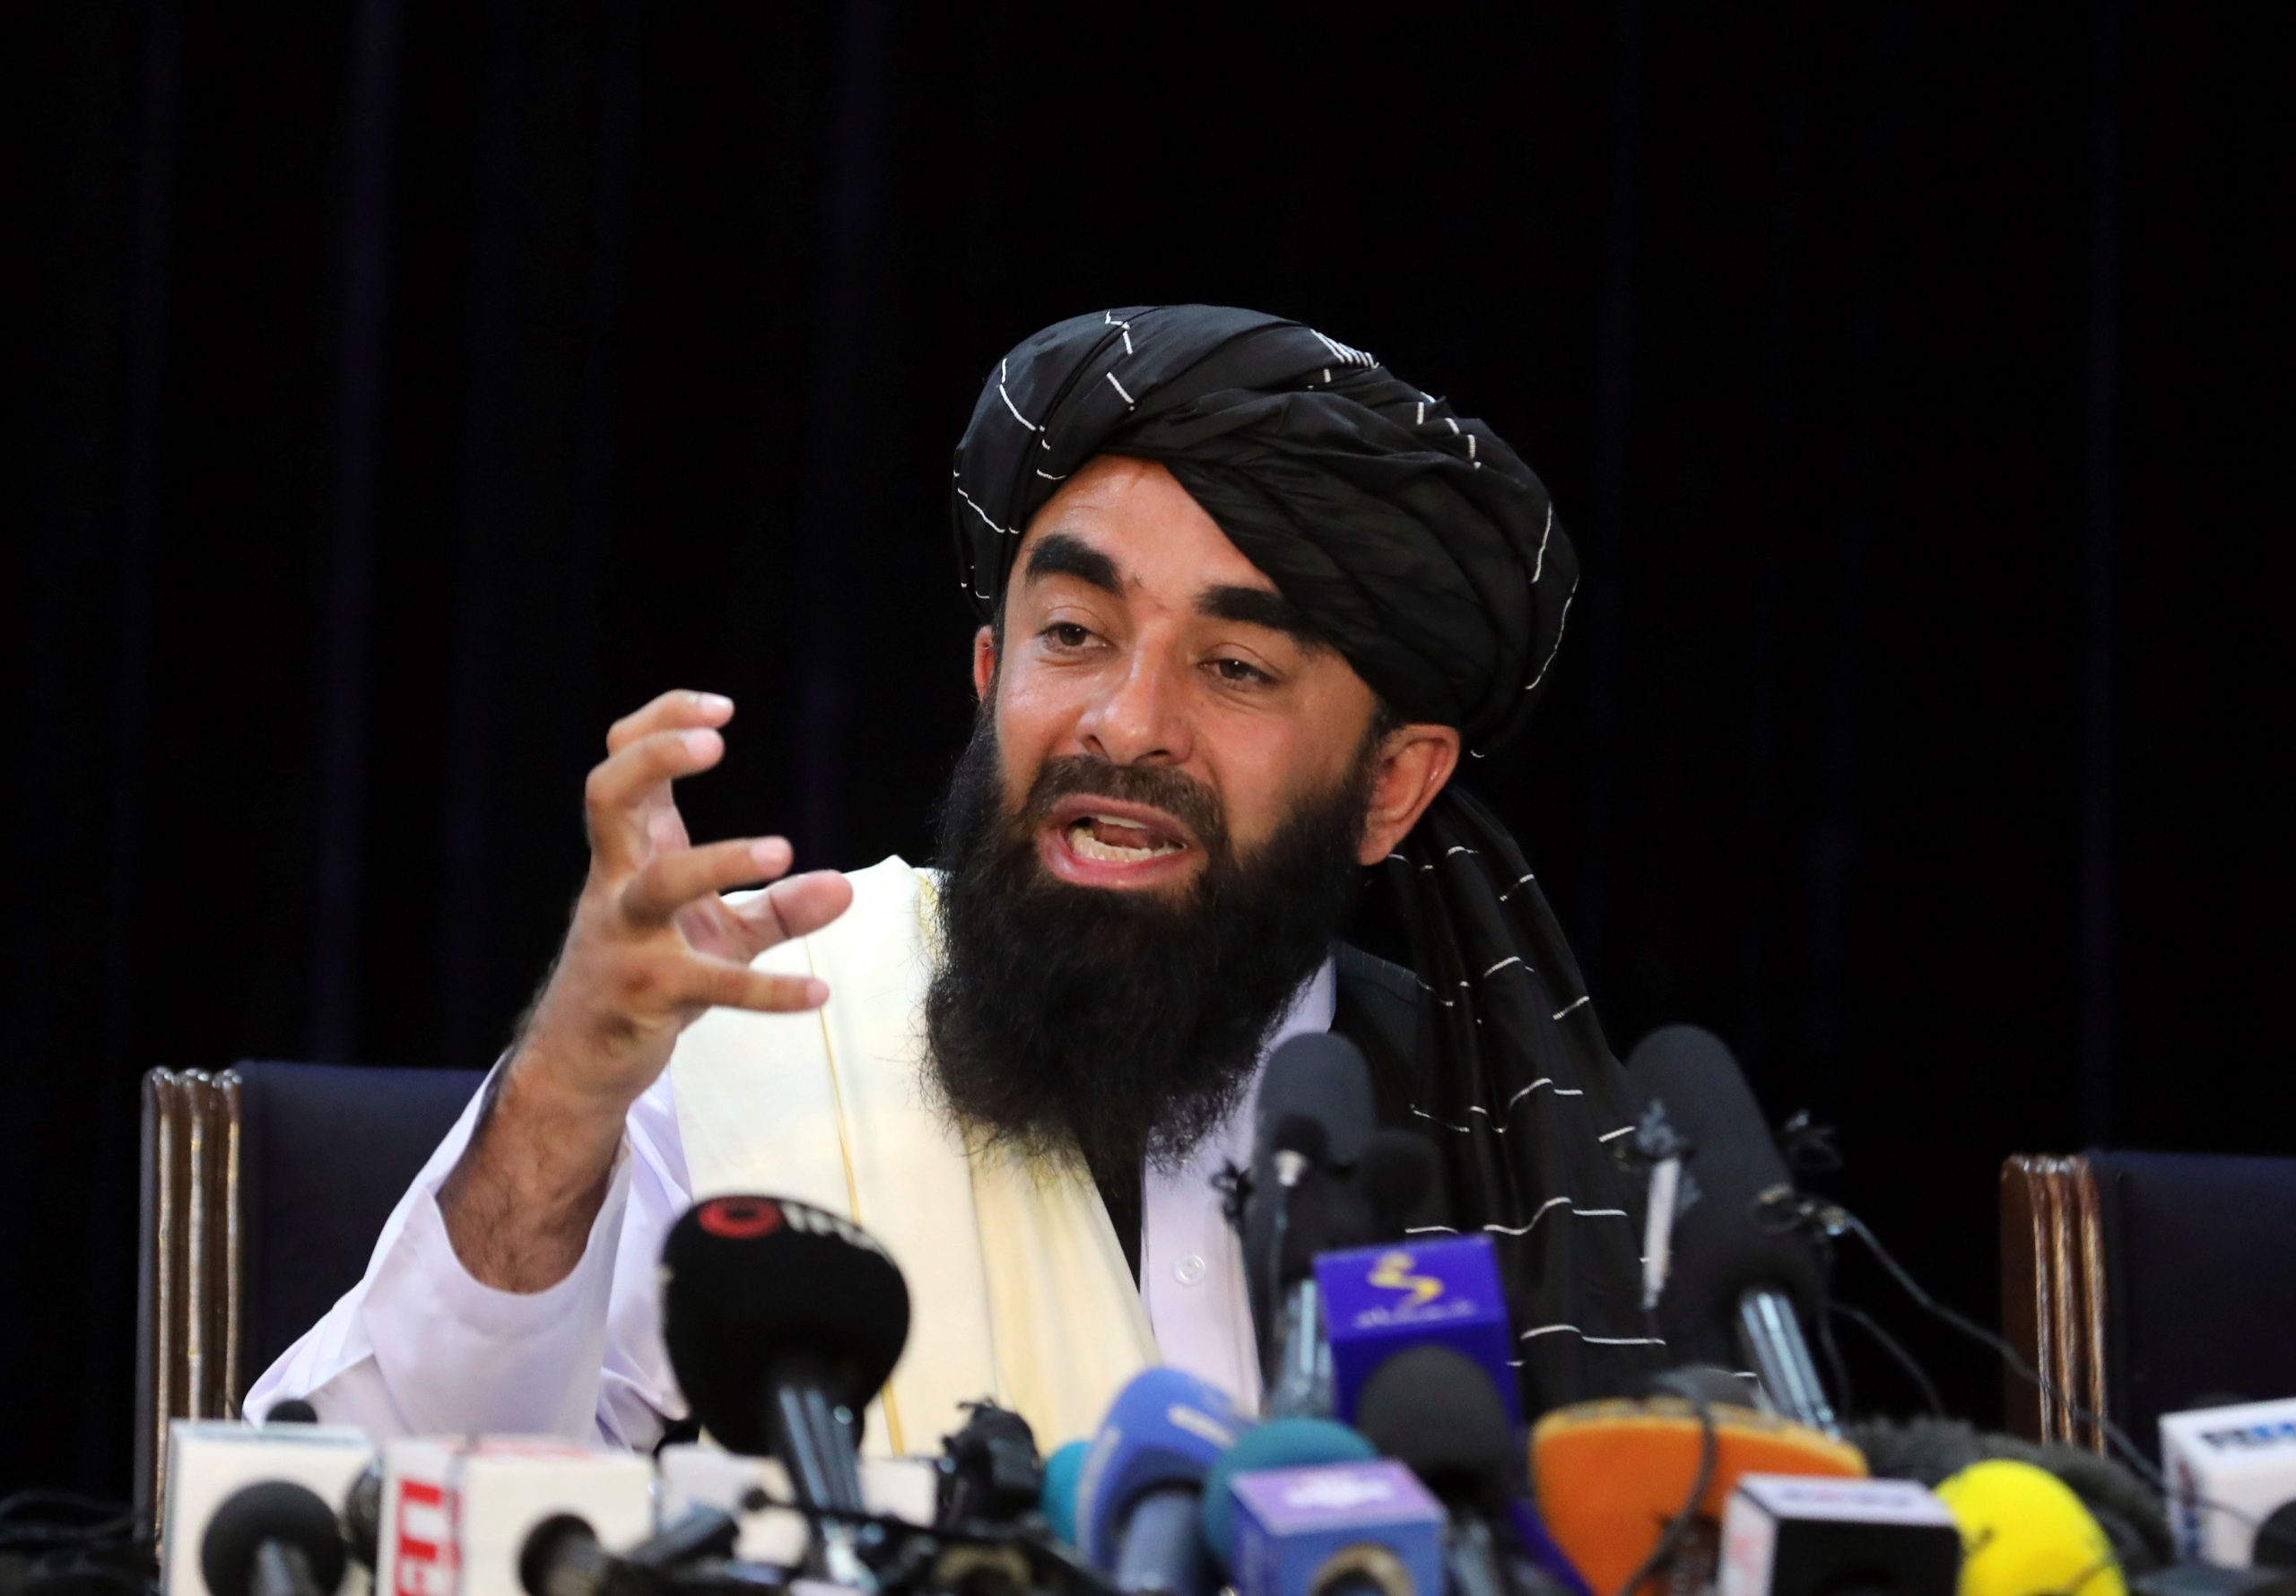 Taliban urge officials not to hold public executions unless directed by ‘top court’